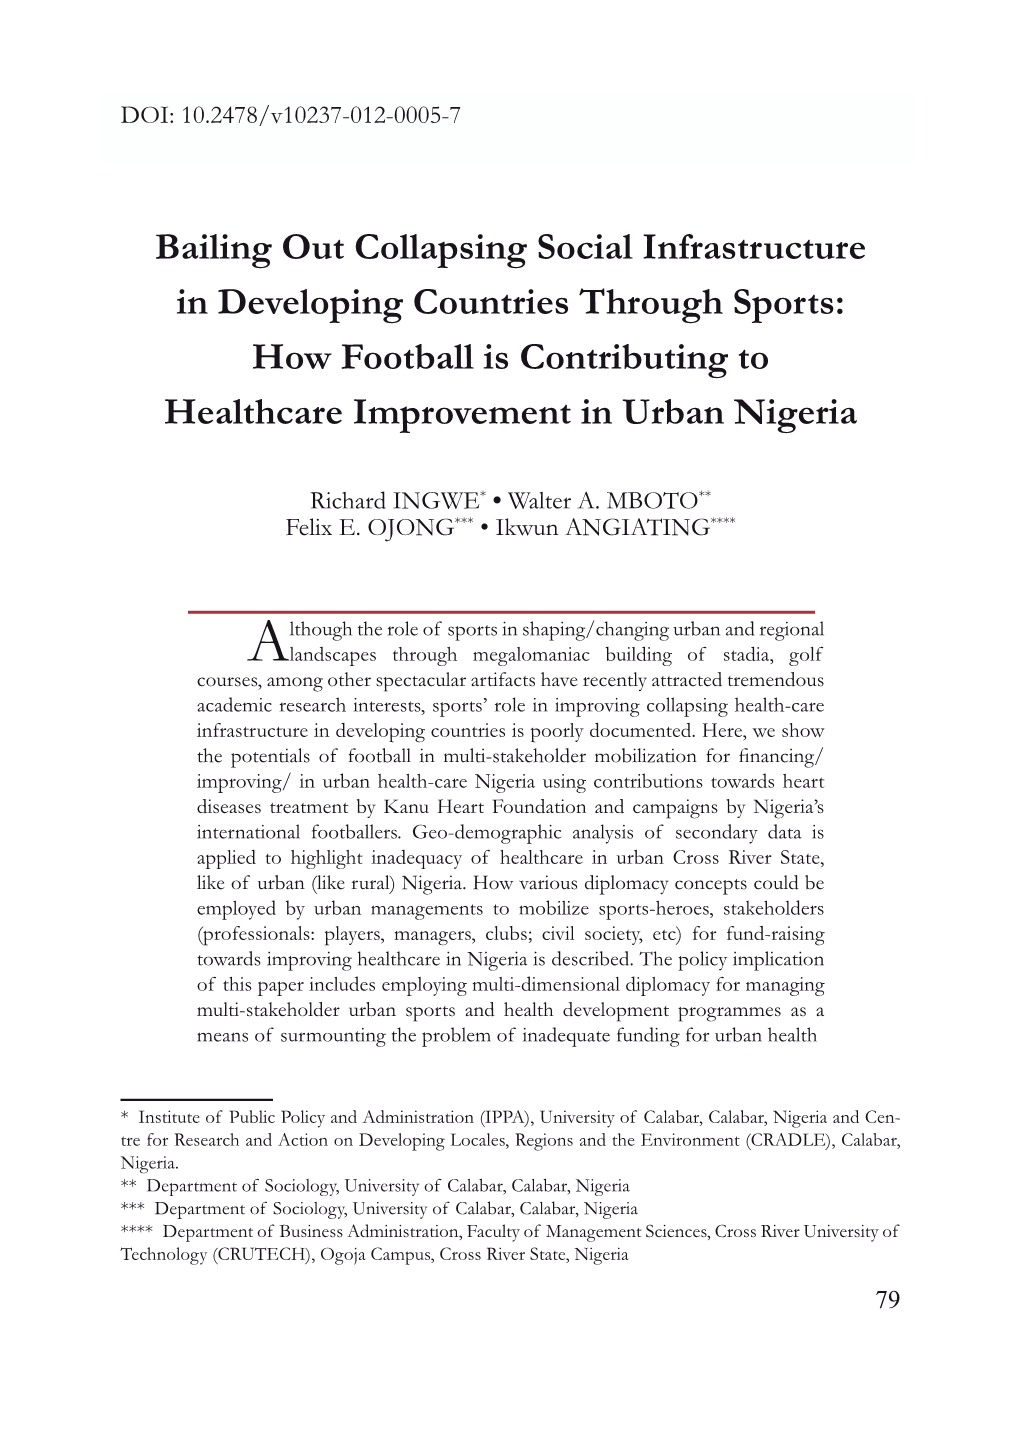 How Football Is Contributing to Healthcare Improvement in Urban Nigeria